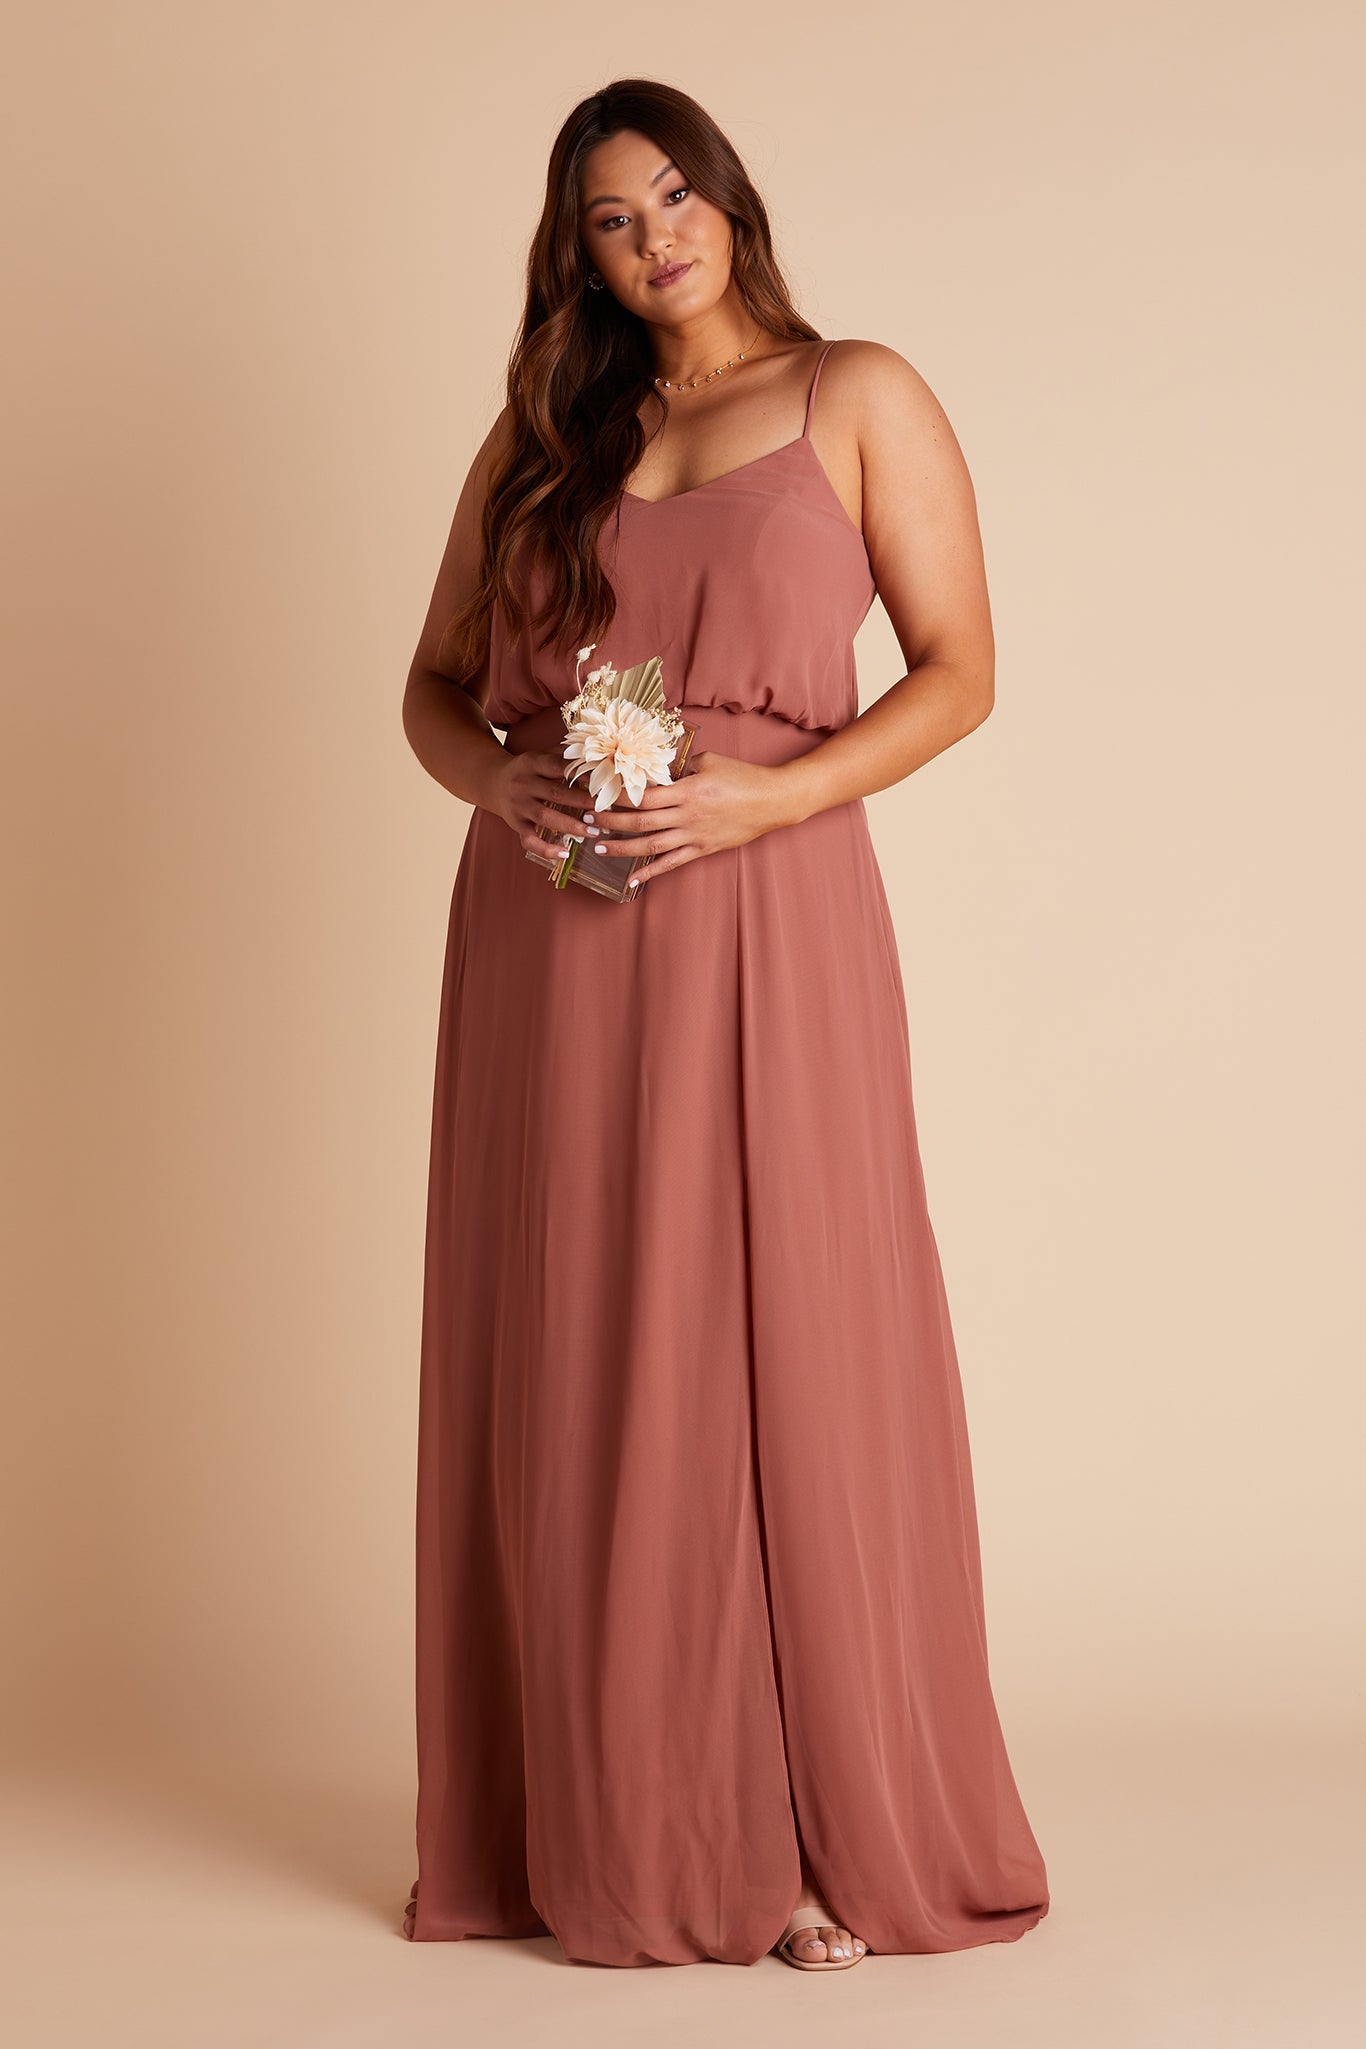 Gwennie plus size bridesmaid dress with slit in desert rose chiffon by Birdy Grey, front view